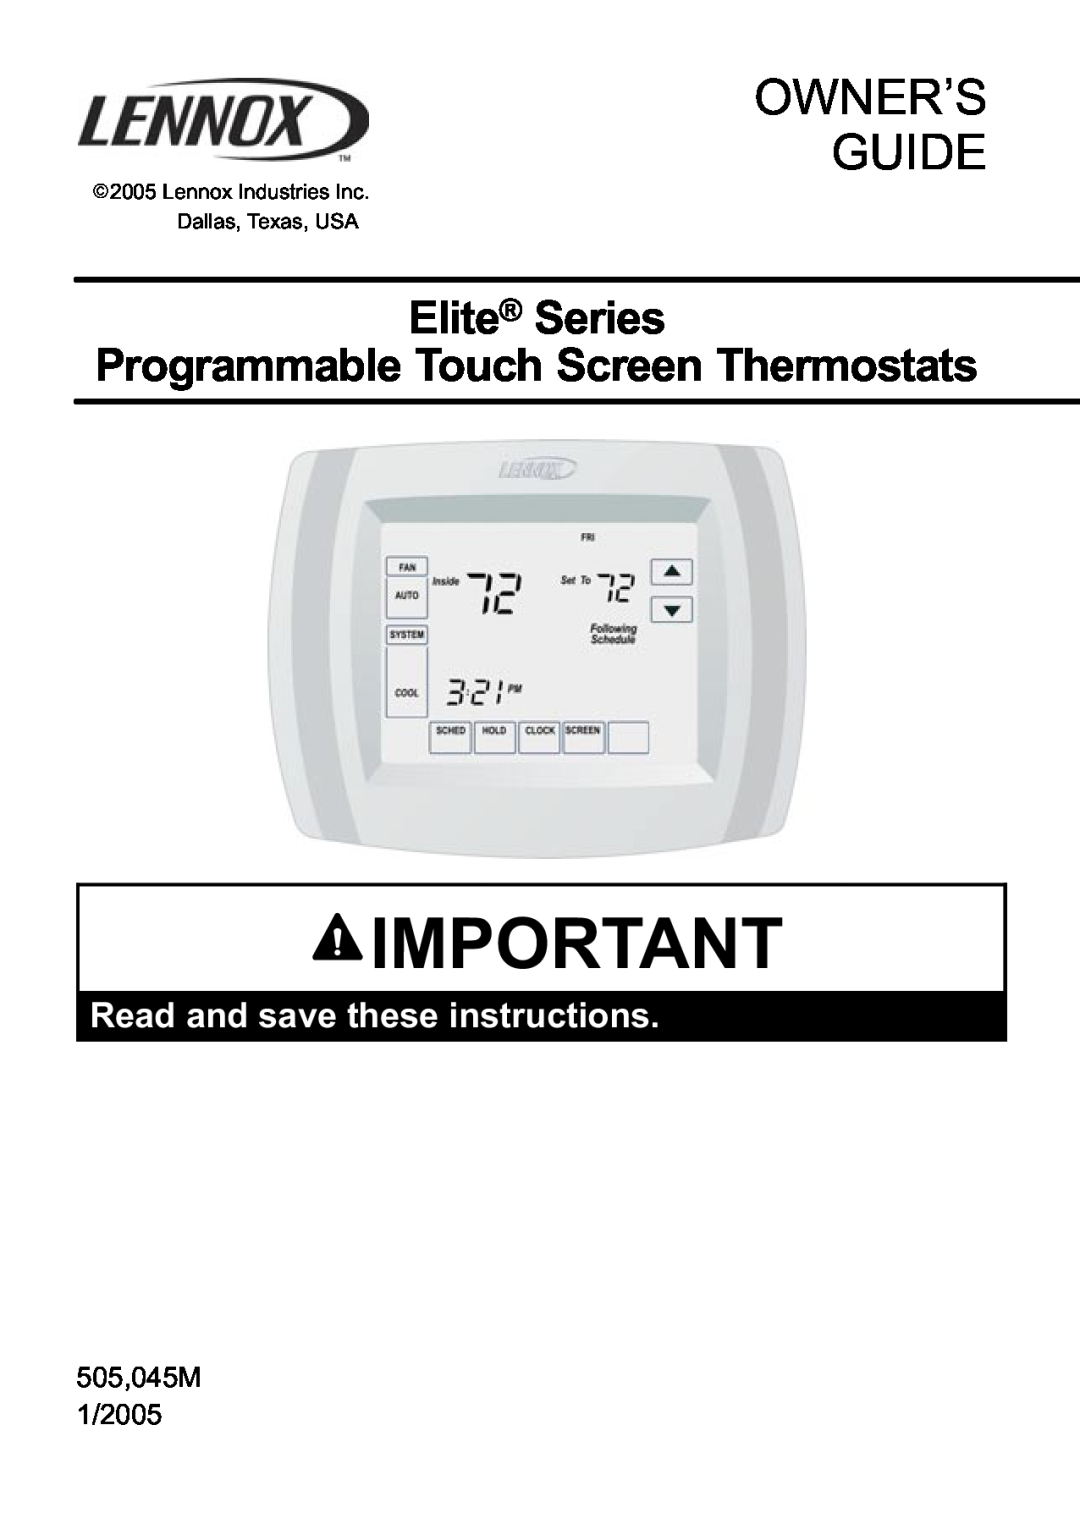 Lennox International Inc Ellite Series manual Owner’S Guide, Elite Series, Programmable Touch Screen Thermostats 